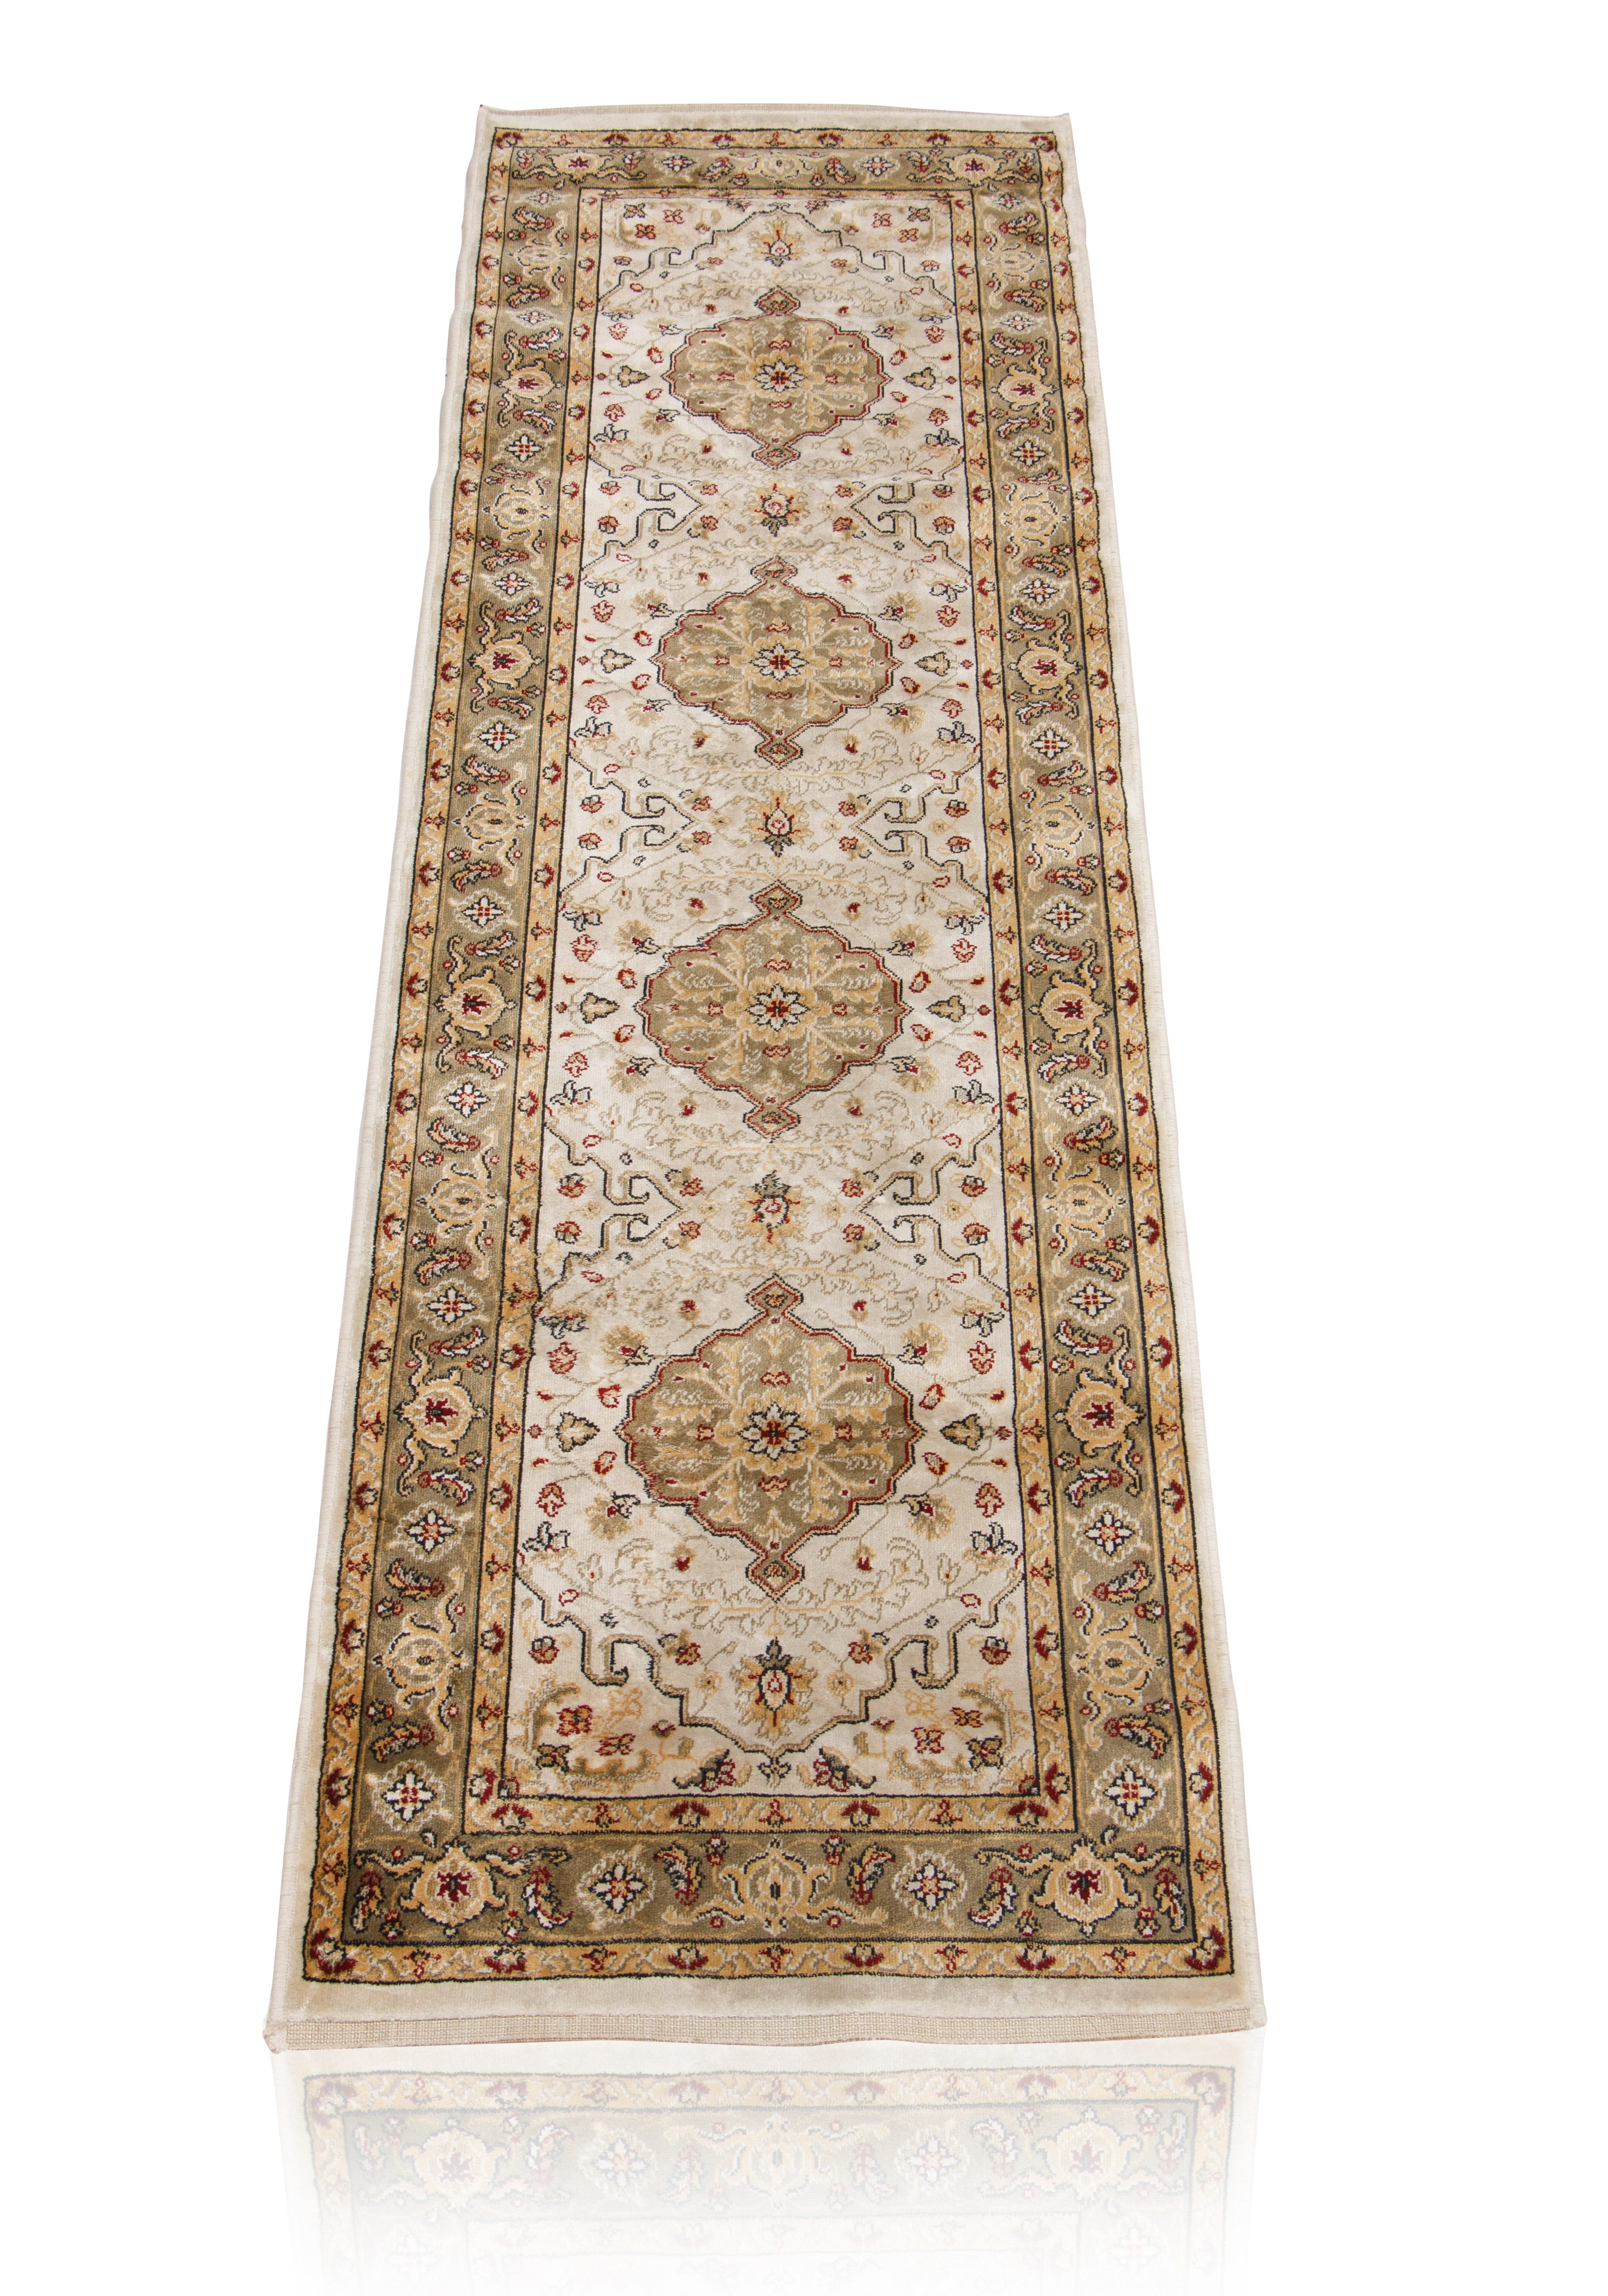 A GROUP OF FOUR GERMAN VERONA RUGS - Image 9 of 14